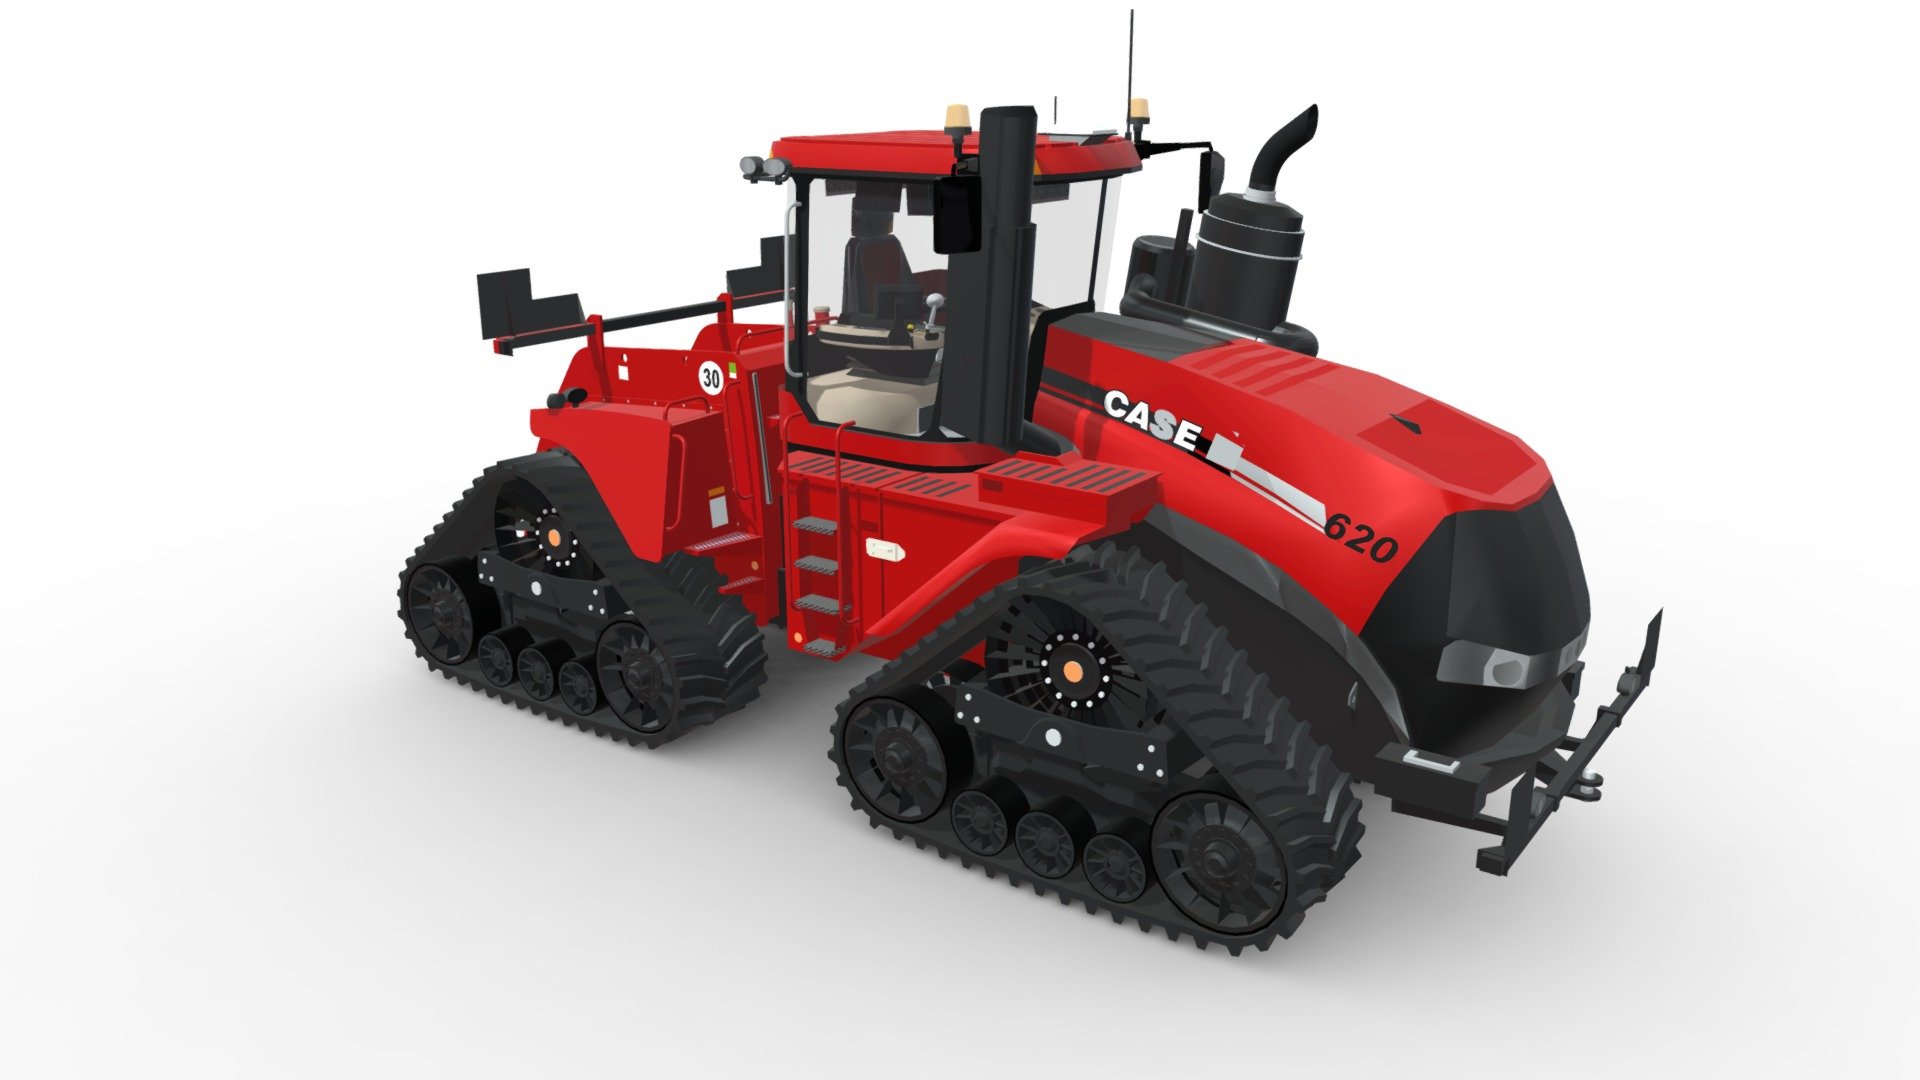 The description provides additional information about the 3D model. It can include details about the model's specifications, usage, or any other relevant information. Here's an example description for a Quadtrac 620 model:

&ldquo;Model of the Quadtrac 620, a powerful agricultural tractor designed for heavy-duty field operations. This 3D model accurately represents the details and features of the real Quadtrac 620, including its robust tracks and advanced engineering. Ideal for use in agricultural simulations, animations, or educational content related to modern farming equipment 3d model